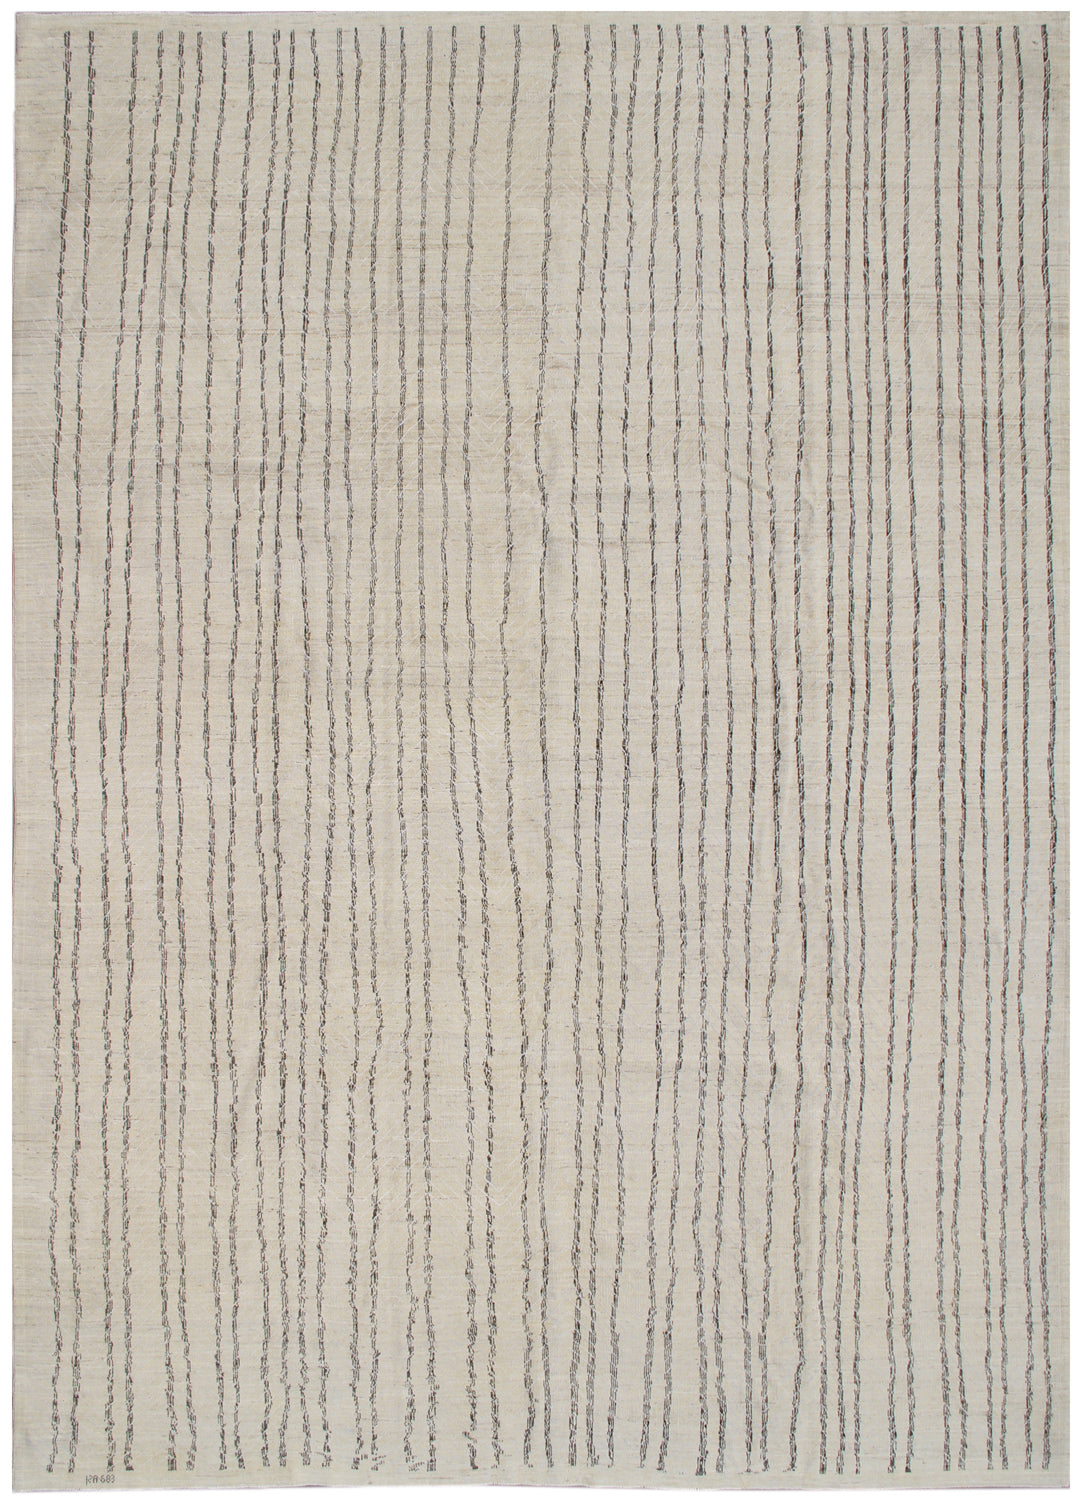 12'x9' Ariana Modern Cream with Brown Lines Rug